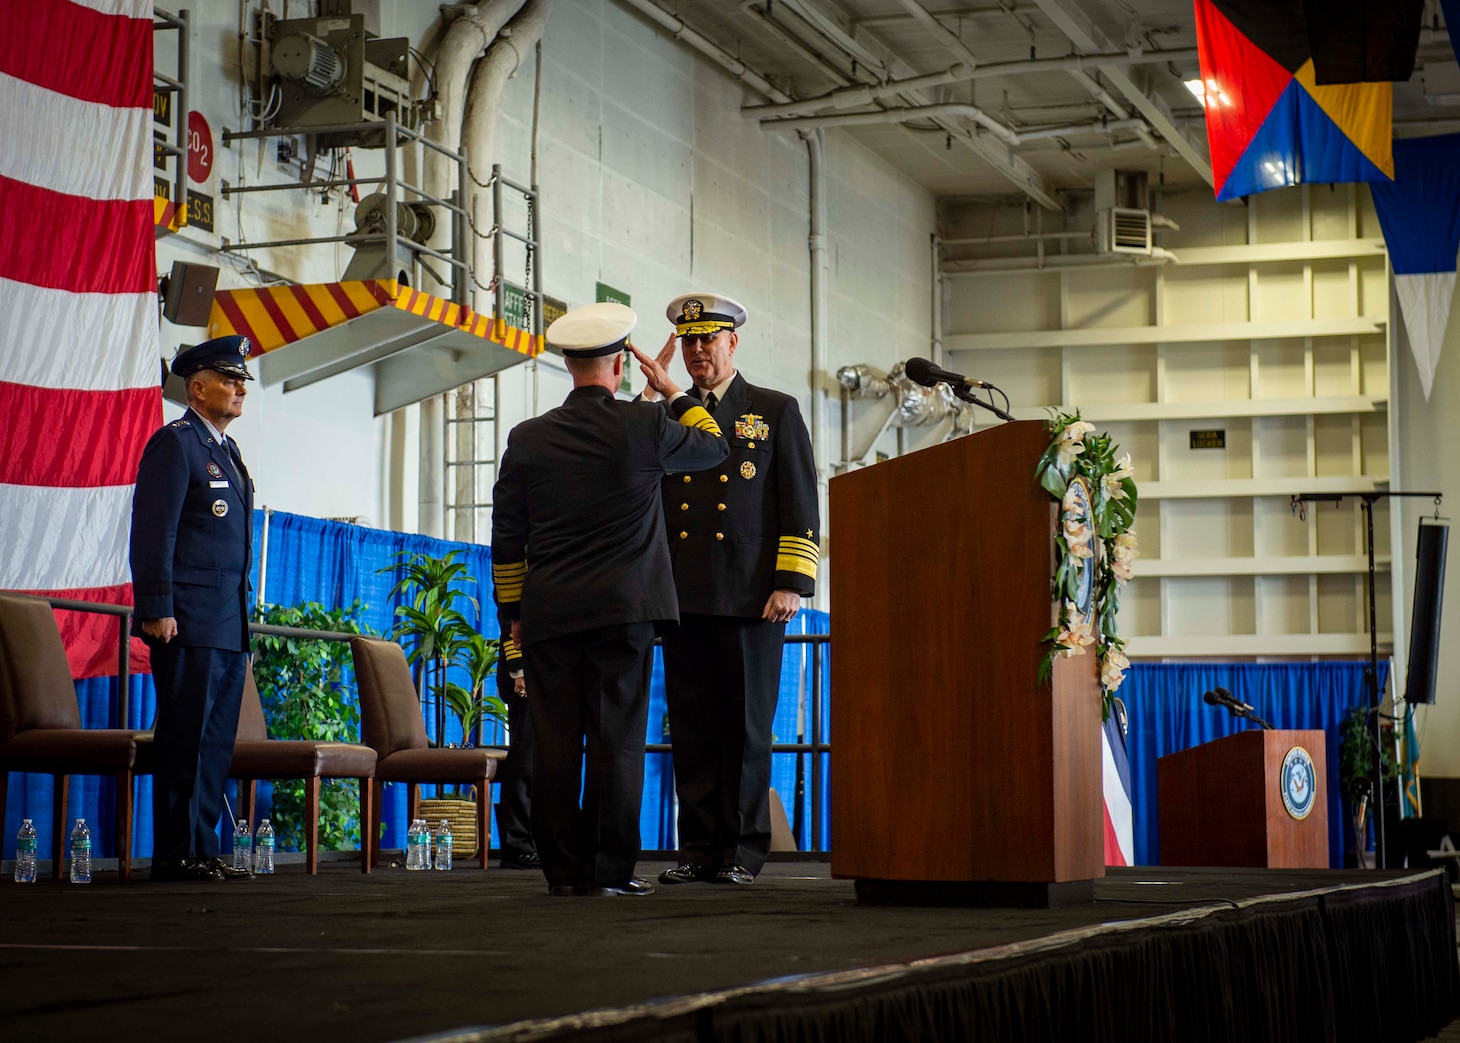 Adm. Christopher W. Grady, left, is relieved as commander, U.S. Fleet Forces Command (USFFC) by Adm. Daryl Caudle during the USFFC change of command ceremony aboard USS George H. W. Bush (CVN 77), Dec. 7, 2021.